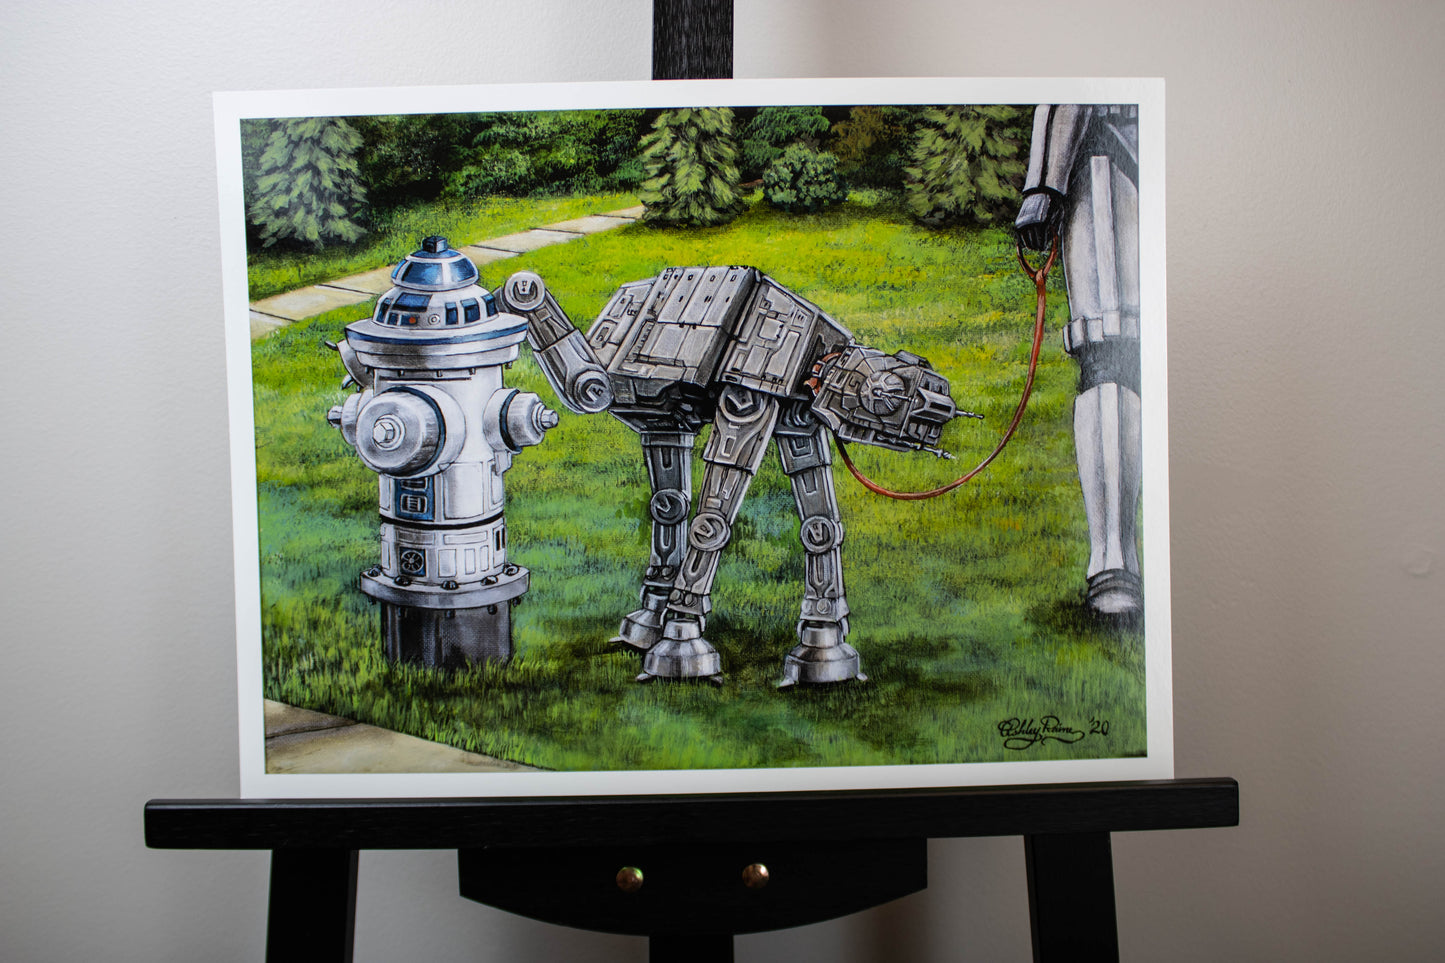 AT-AT and R2-D2 Fire Hydrant "Imperial Mark" (Star Wars) Imperial Pupper Parody Art Print